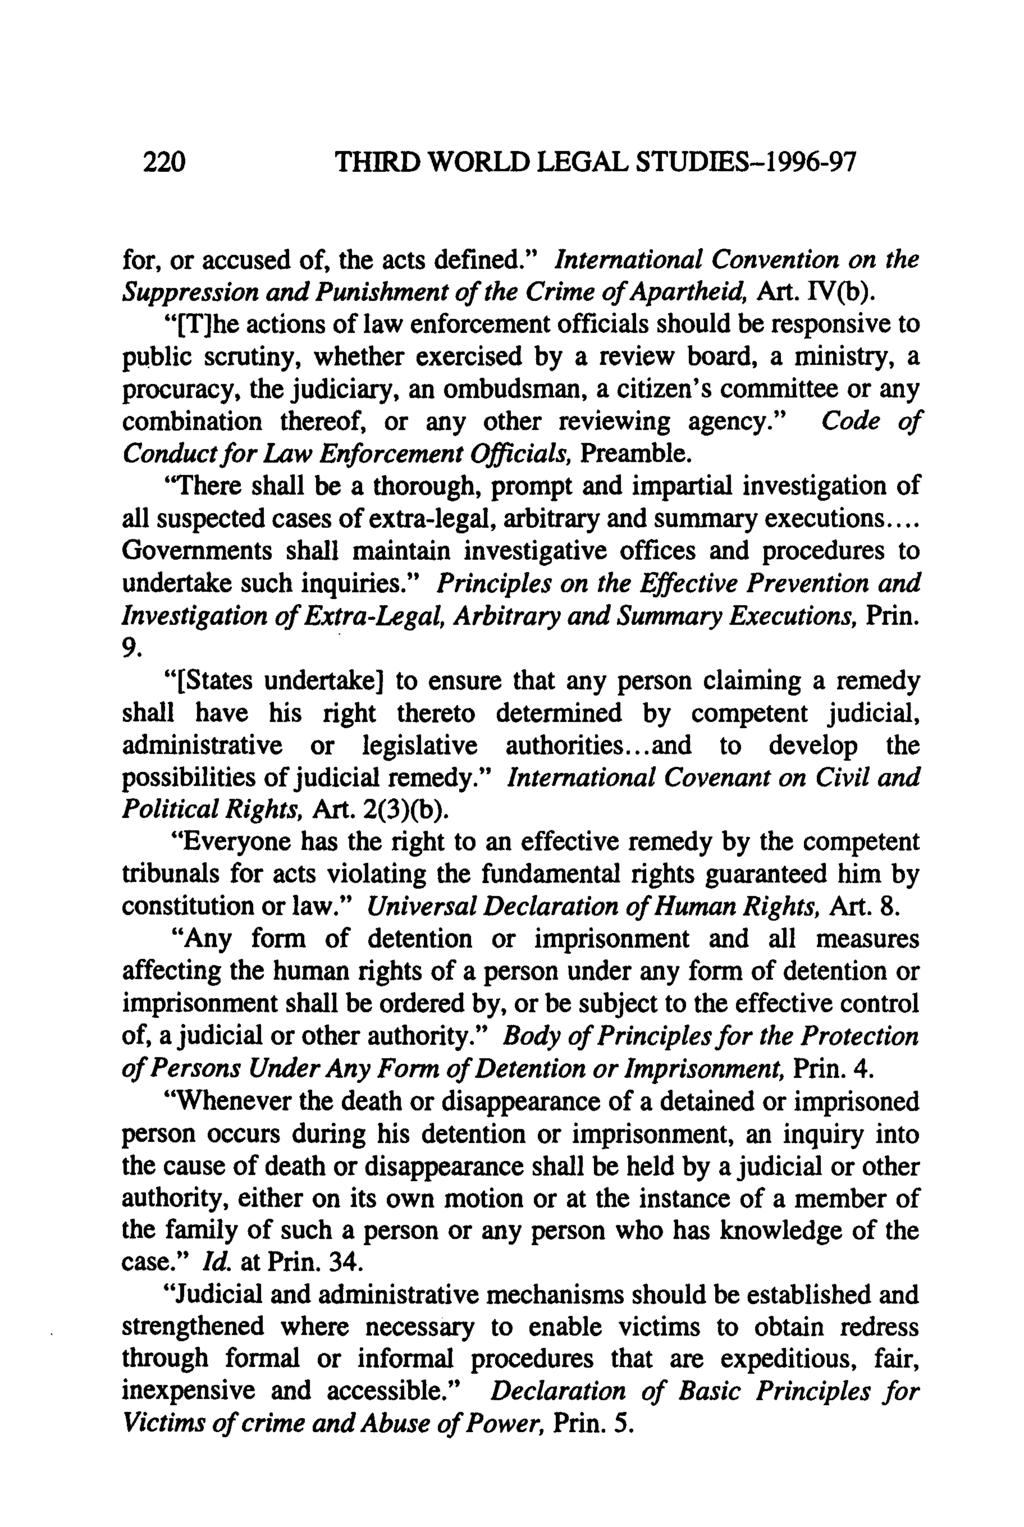 220 THIRD WORLD LEGAL STUDIES-1996-97 for, or accused of, the acts defined." International Convention on the Suppression and Punishment of the Crime of Apartheid, Art. IV(b).